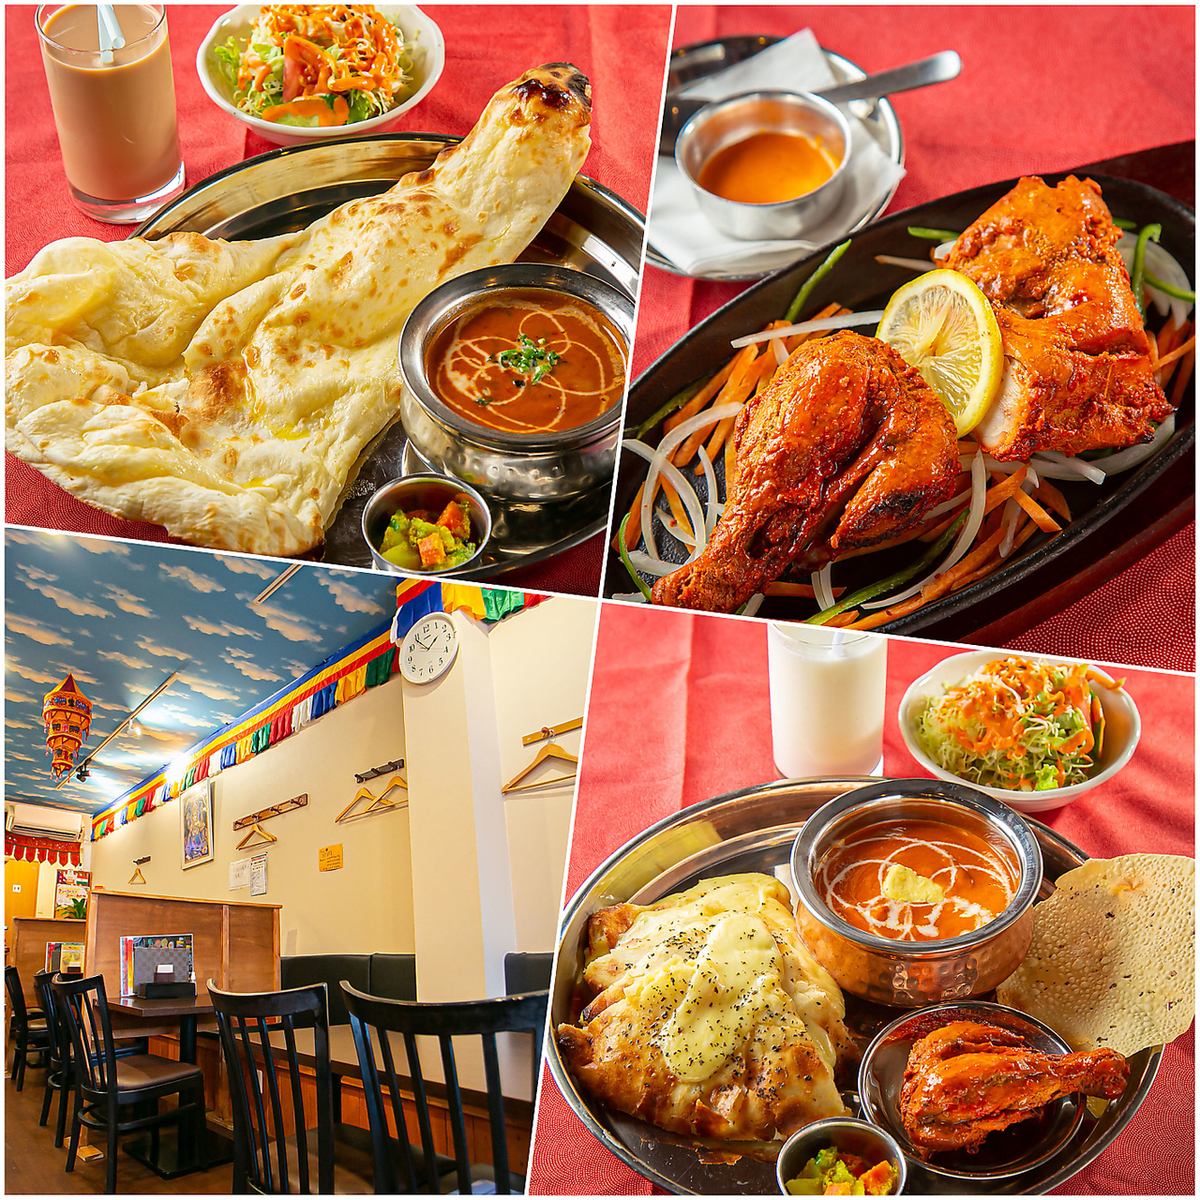 Authentic Indian and Nepalese cuisine! 2 hours all-you-can-eat for 2,580 yen, 2-hour all-you-can-eat and drink for 3,280 yen